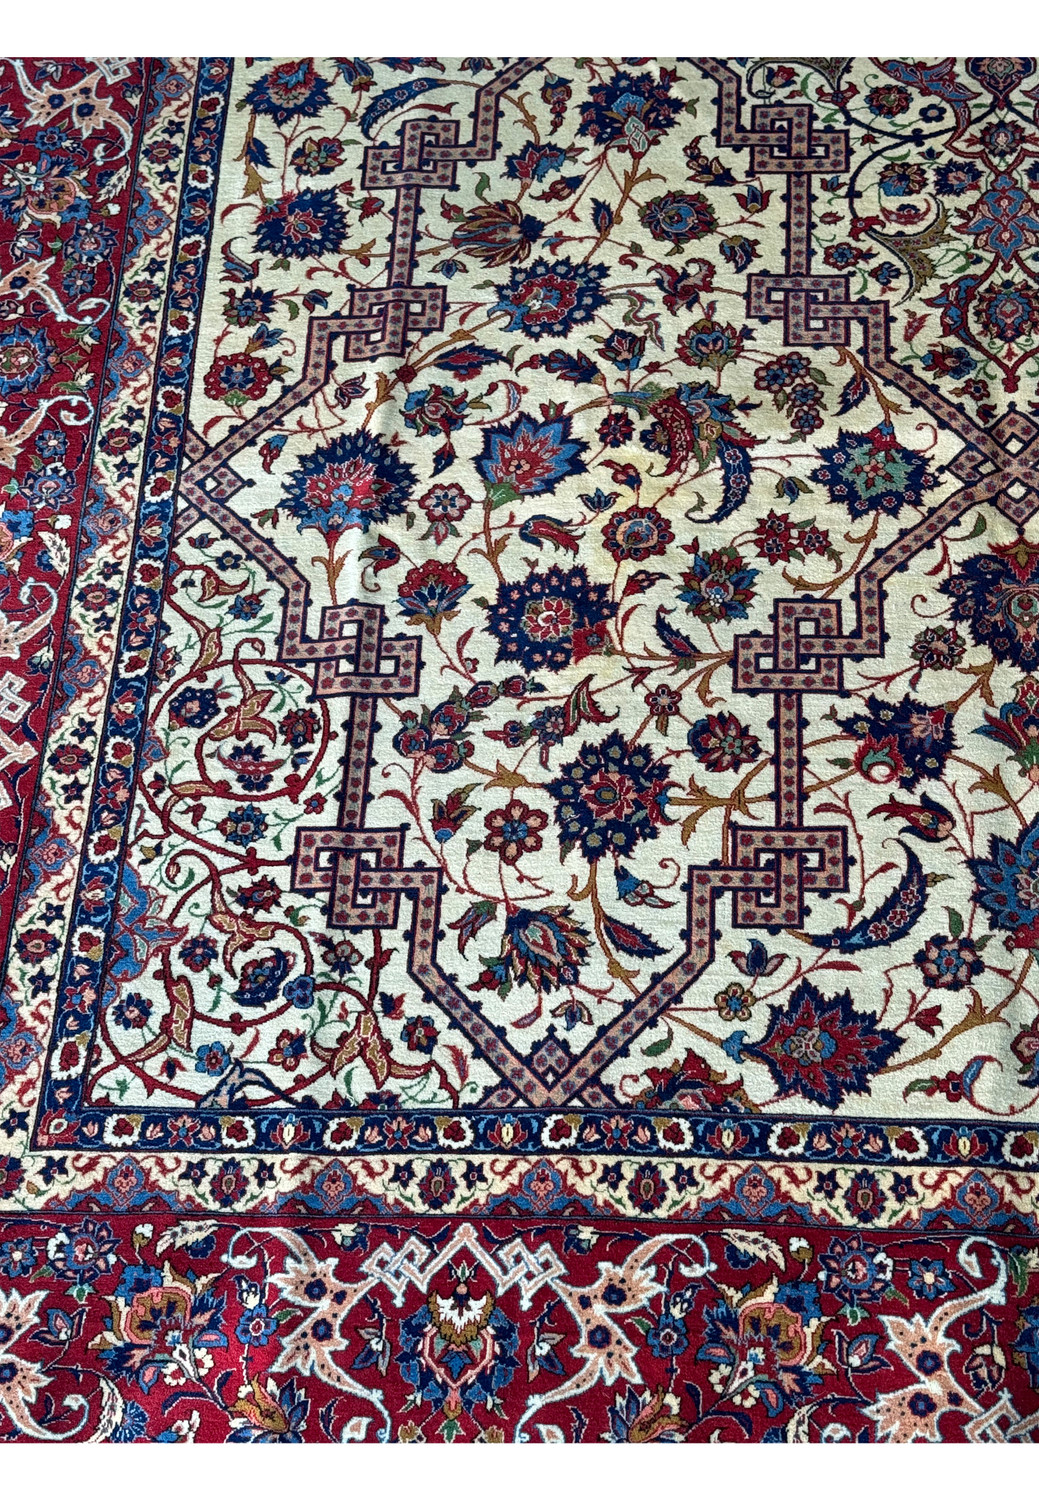 Close-up of the Persian Isfahan rug's border corner, featuring detailed floral motifs and geometric designs.